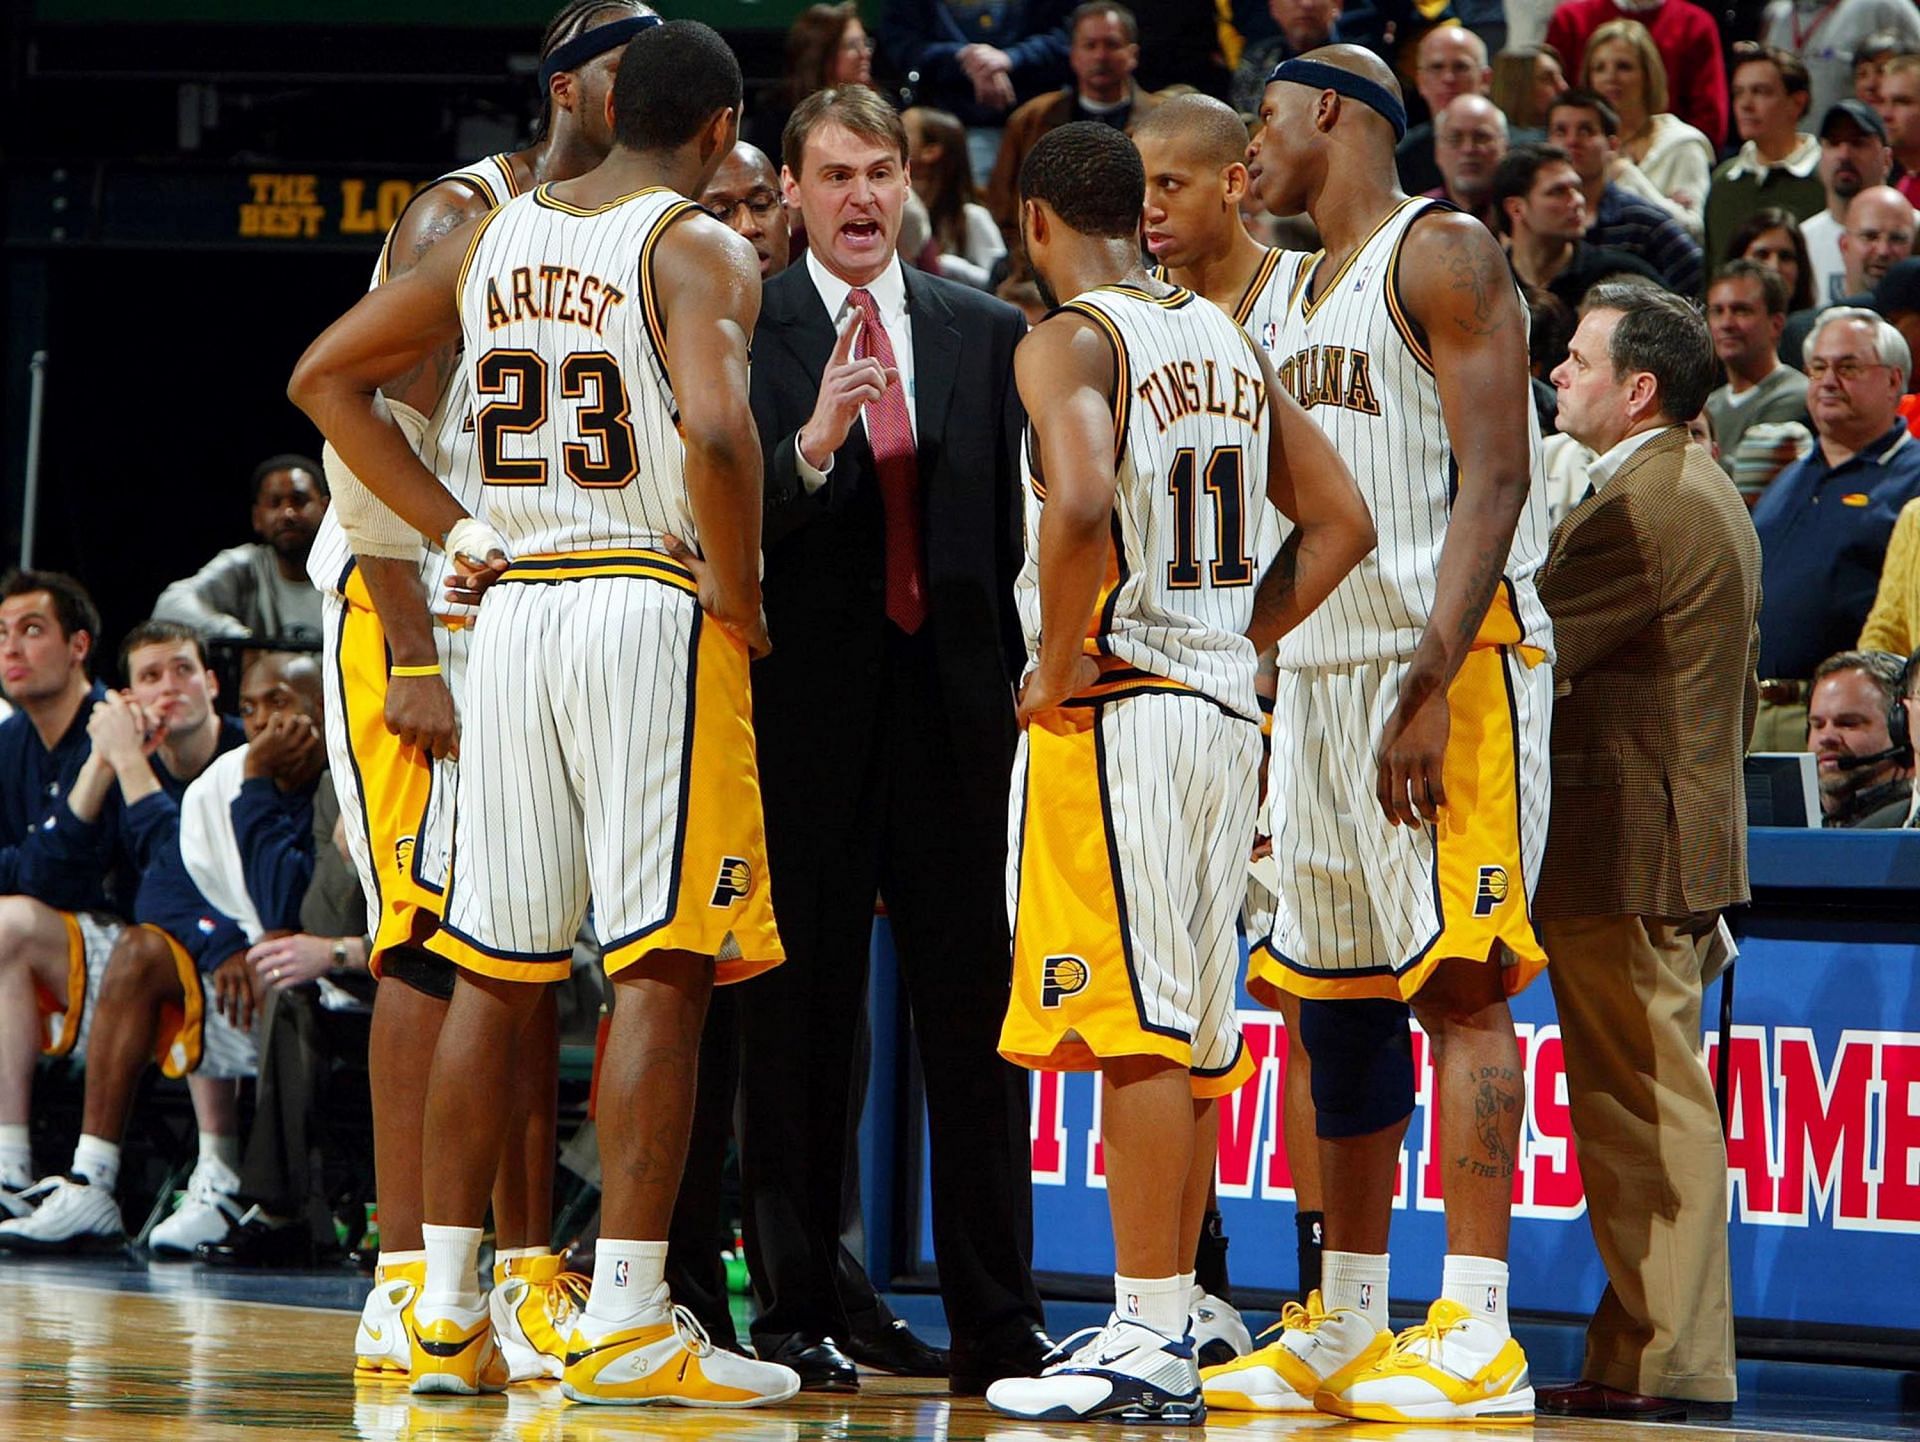 Rick Carlisle the Head Coach of the Indiana Pacerss gives instructions to his team in 2004.